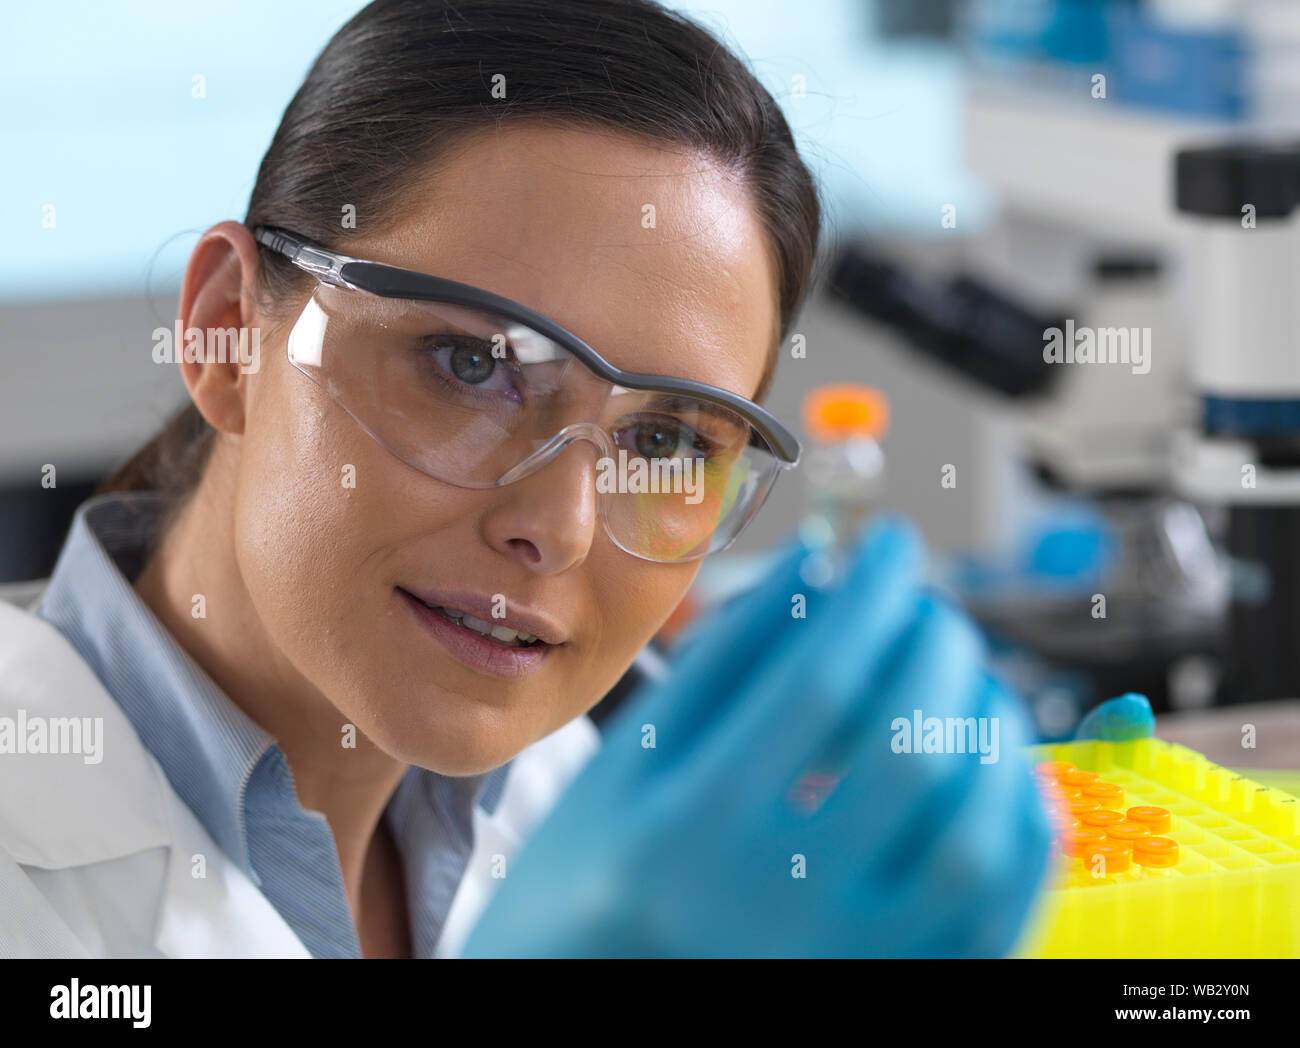 Biotechnology research. Scientist examining sample in a test tube ready for automated analysis. Stock Photo